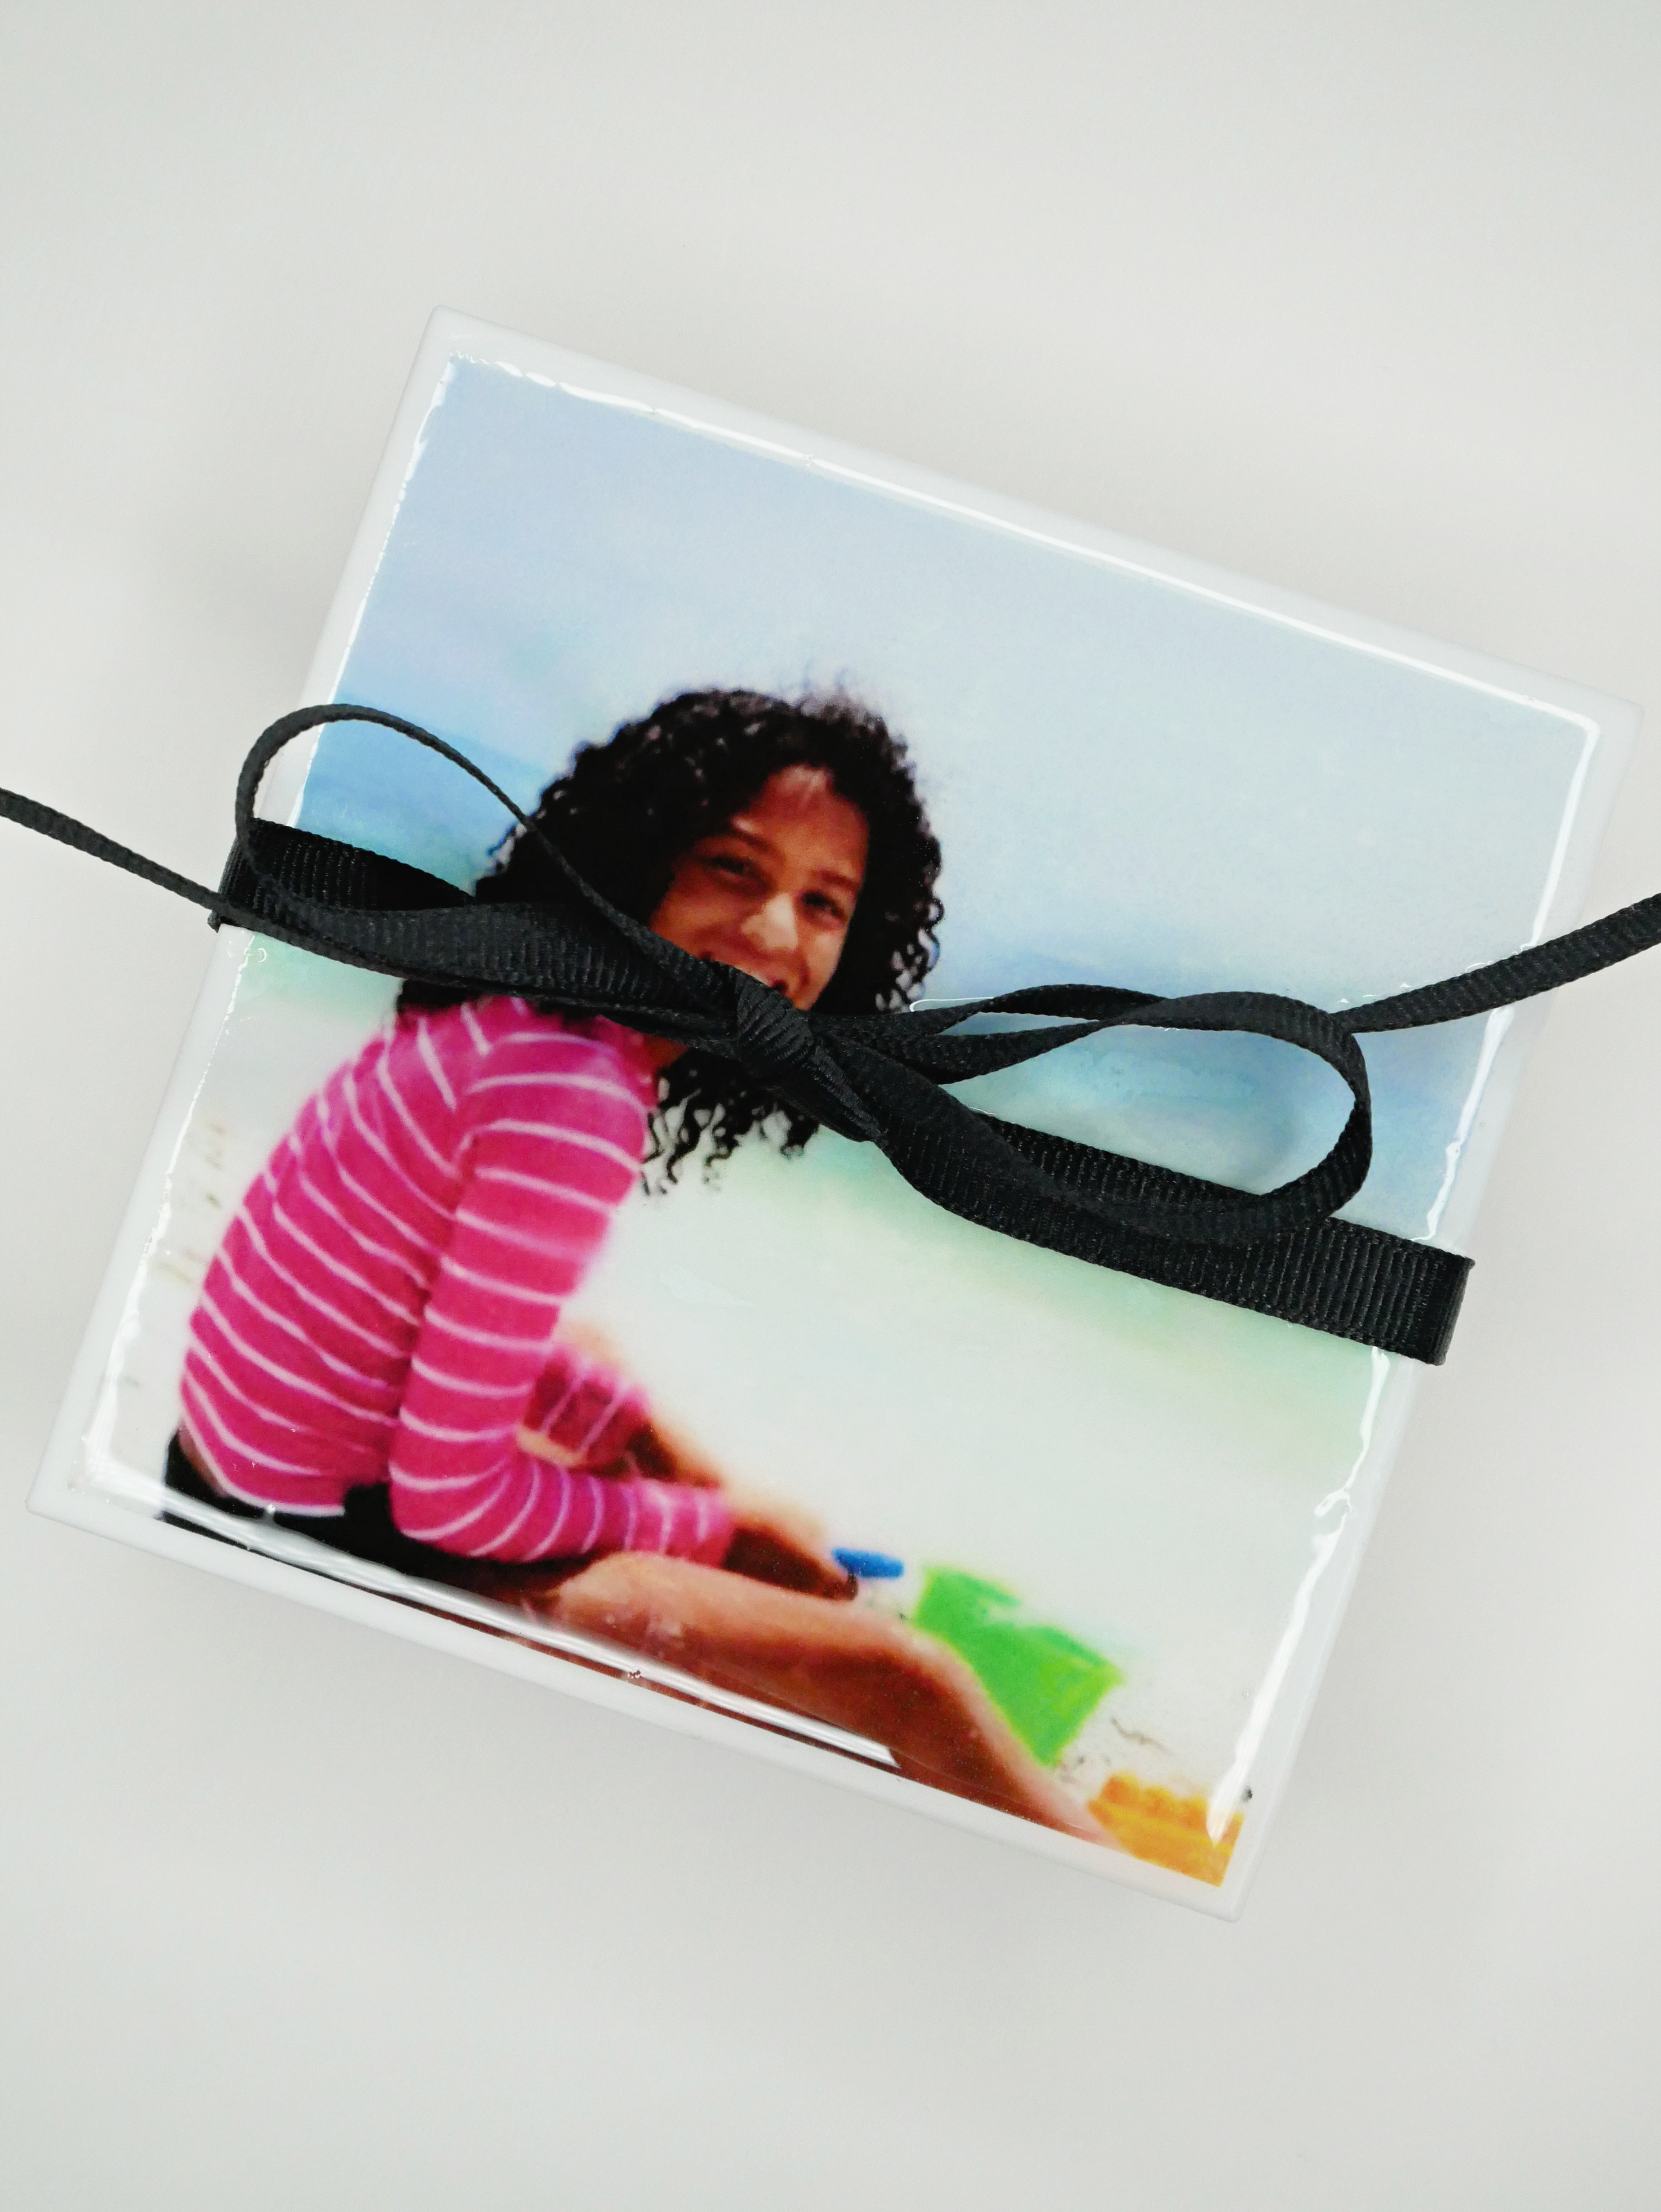 Learn how to make photo coasters. These DIY Photo Coasters are incredibly simple and inexpensive to make, and a fun project that will bring your photos to life. Everyone will love these personalized photo gifts.